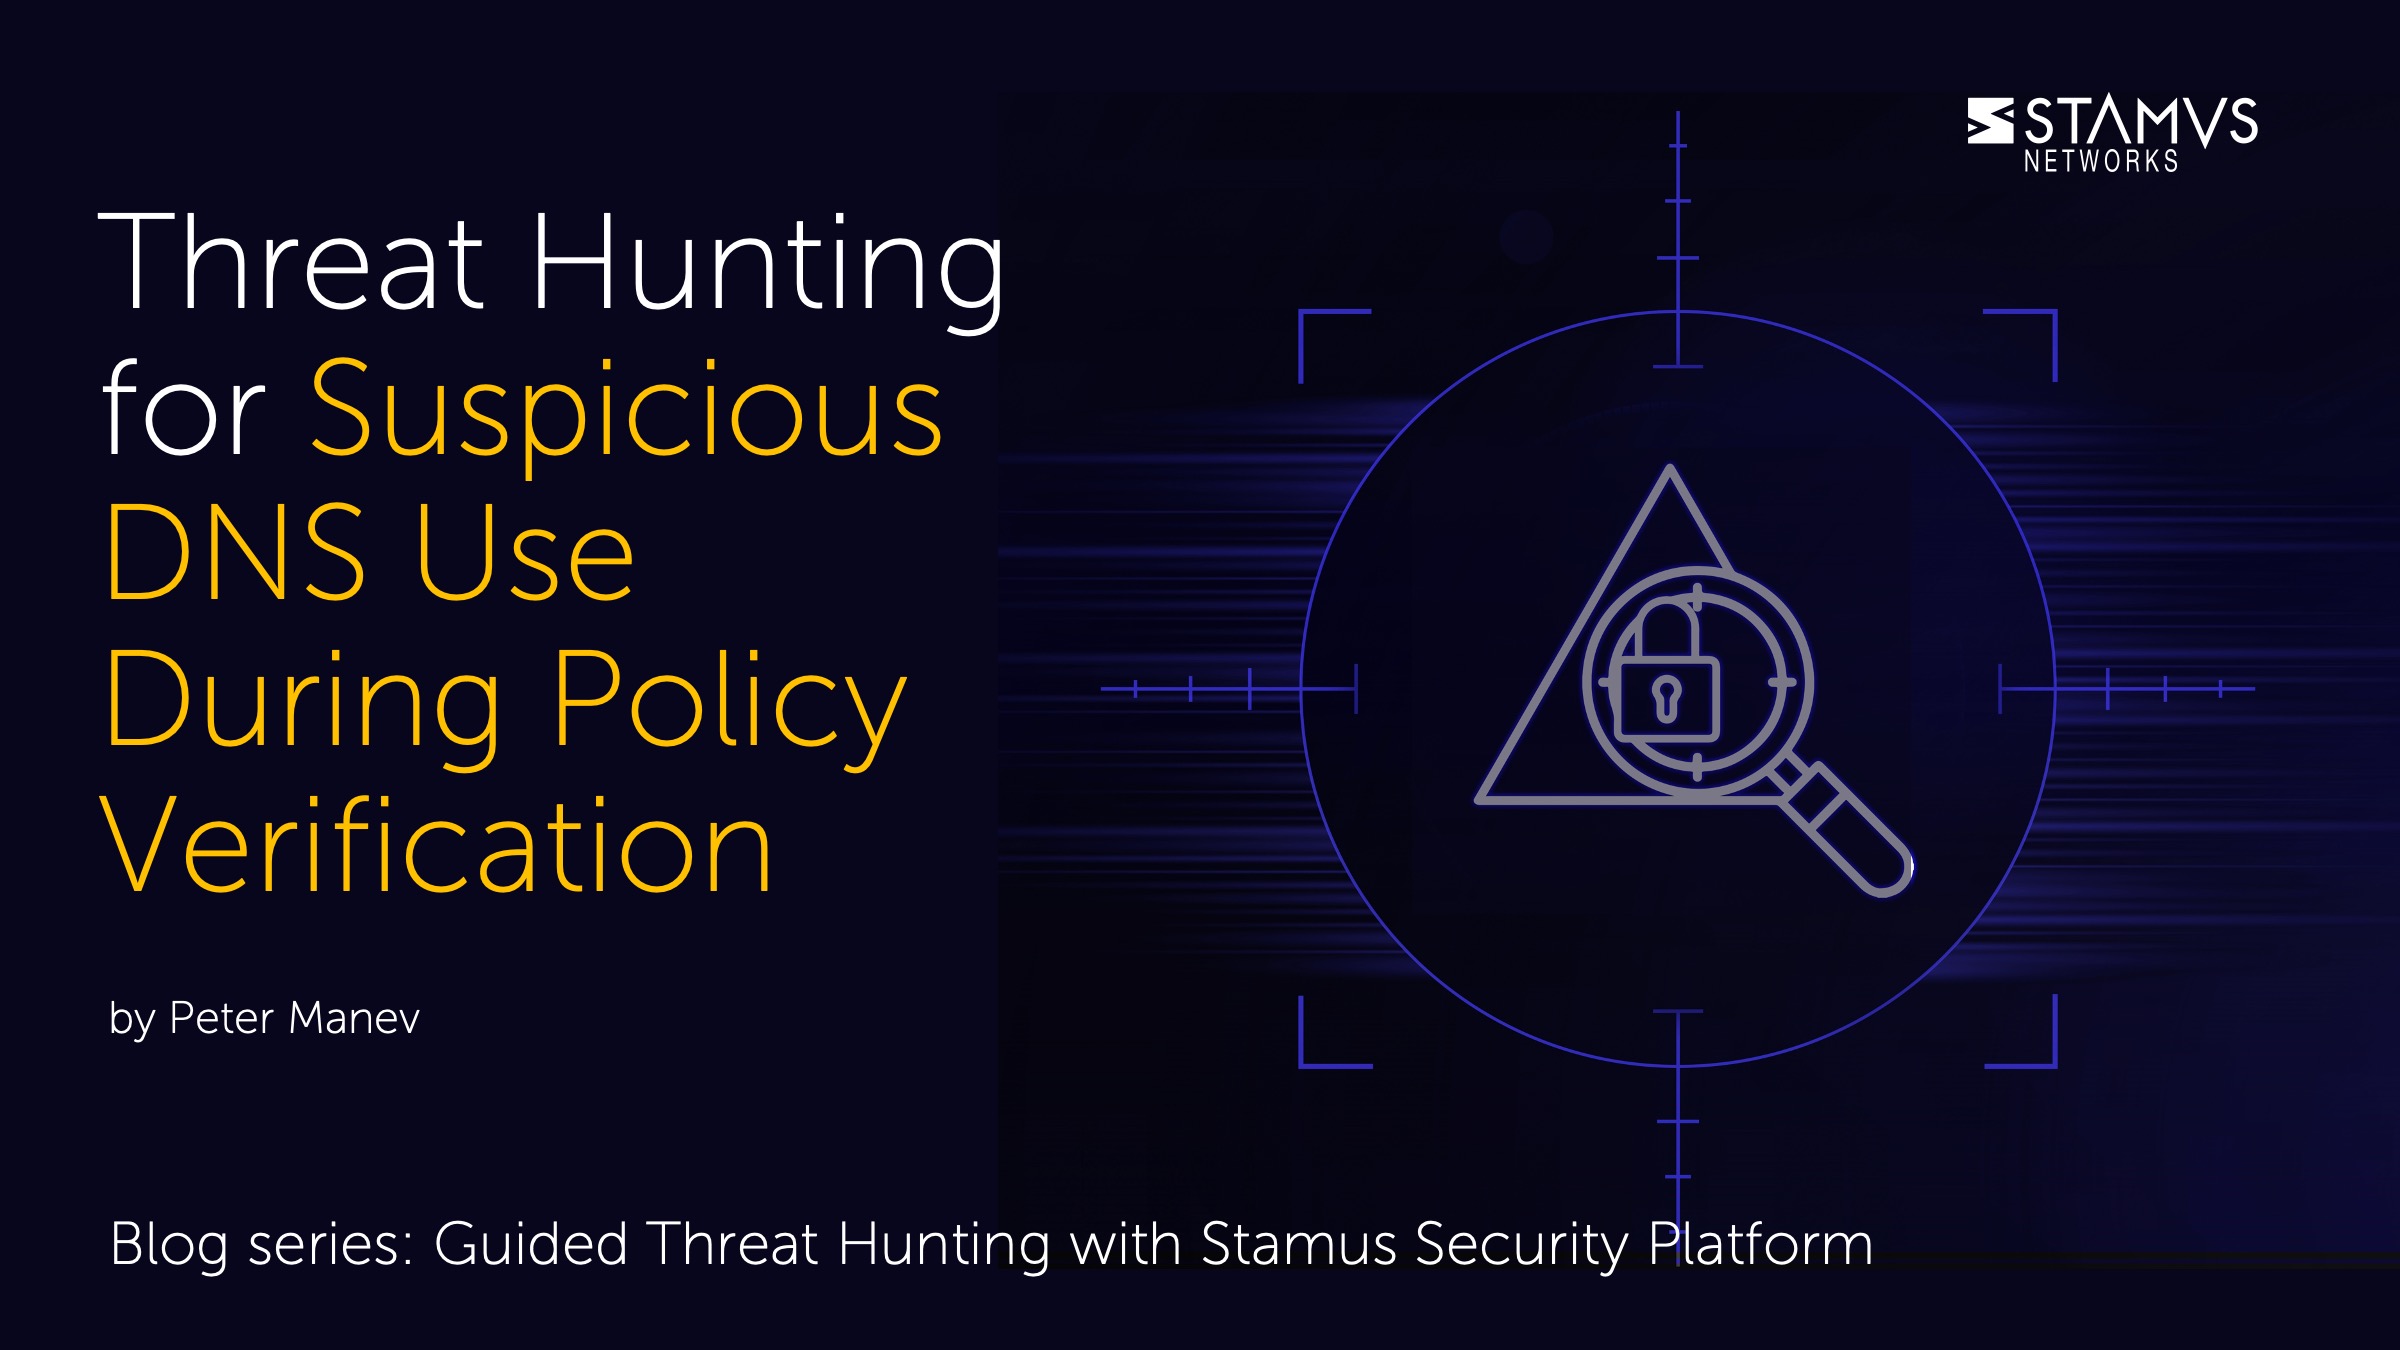 Hunting for Suspicious DNS Use During Policy Verification by Peter Manev